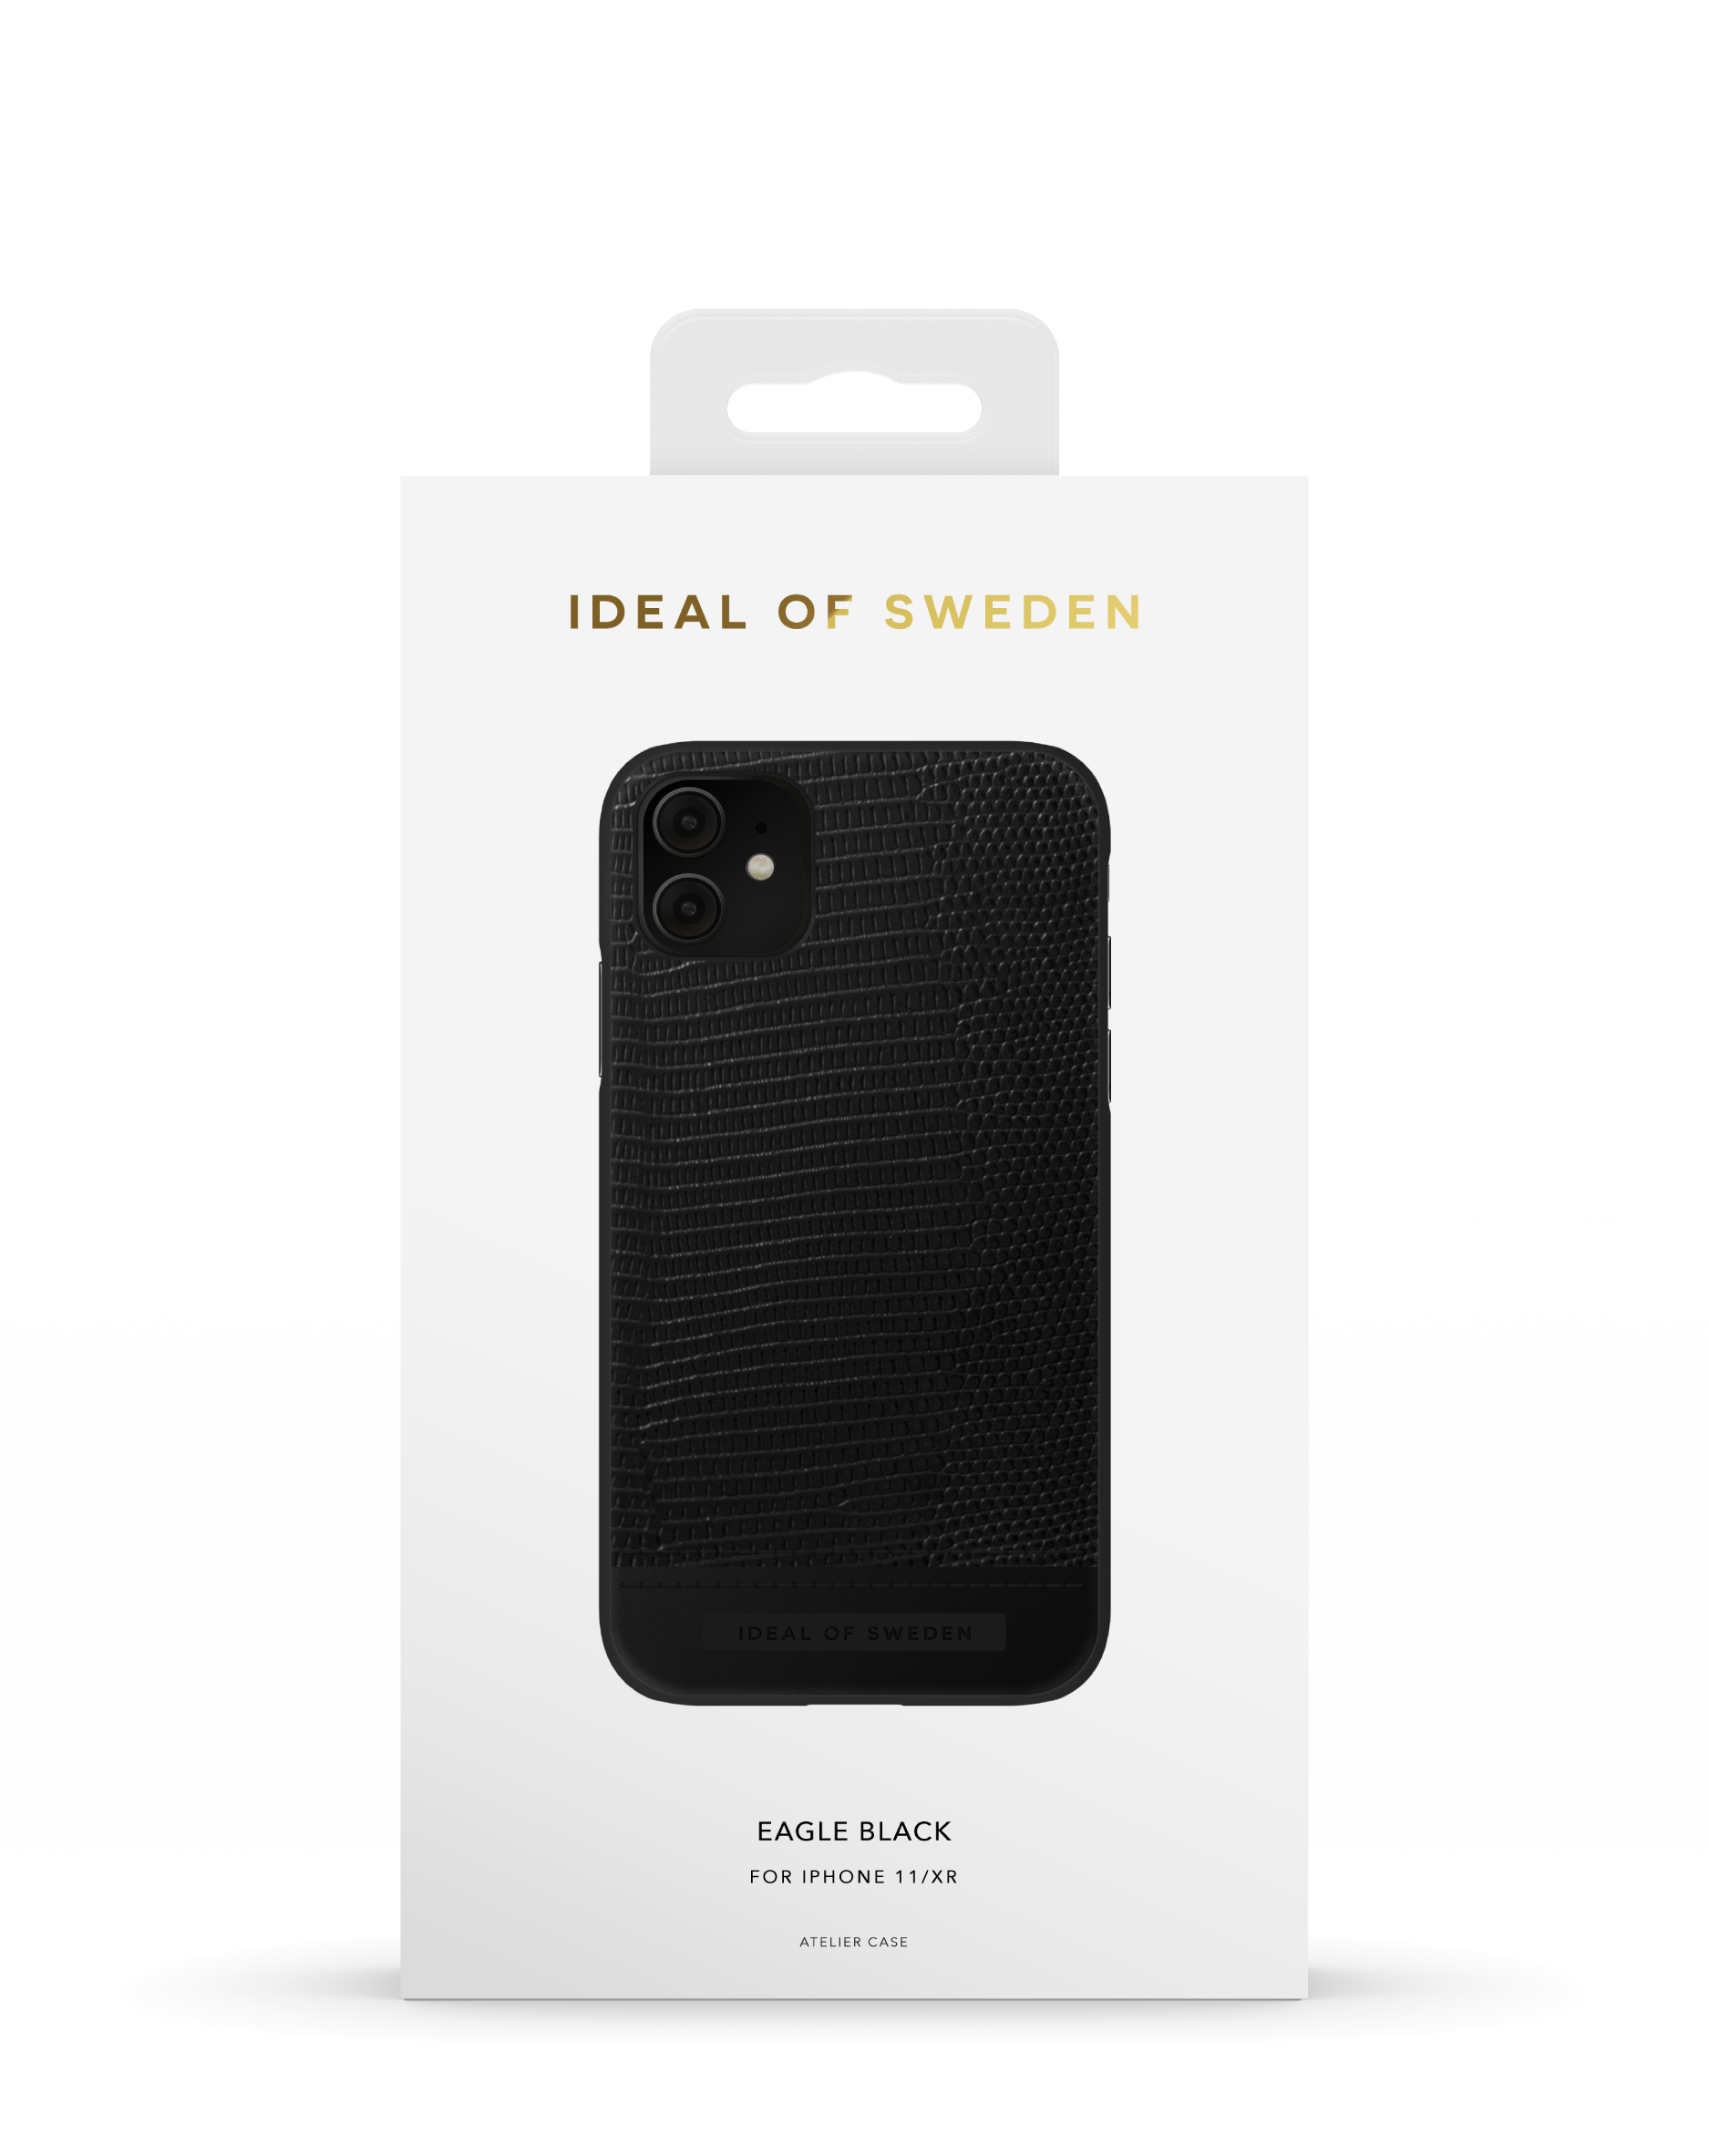 IDEAL OF SWEDEN IDACAW20-1961-229, Backcover, XR, Apple, Eagle iPhone 11, Black iPhone